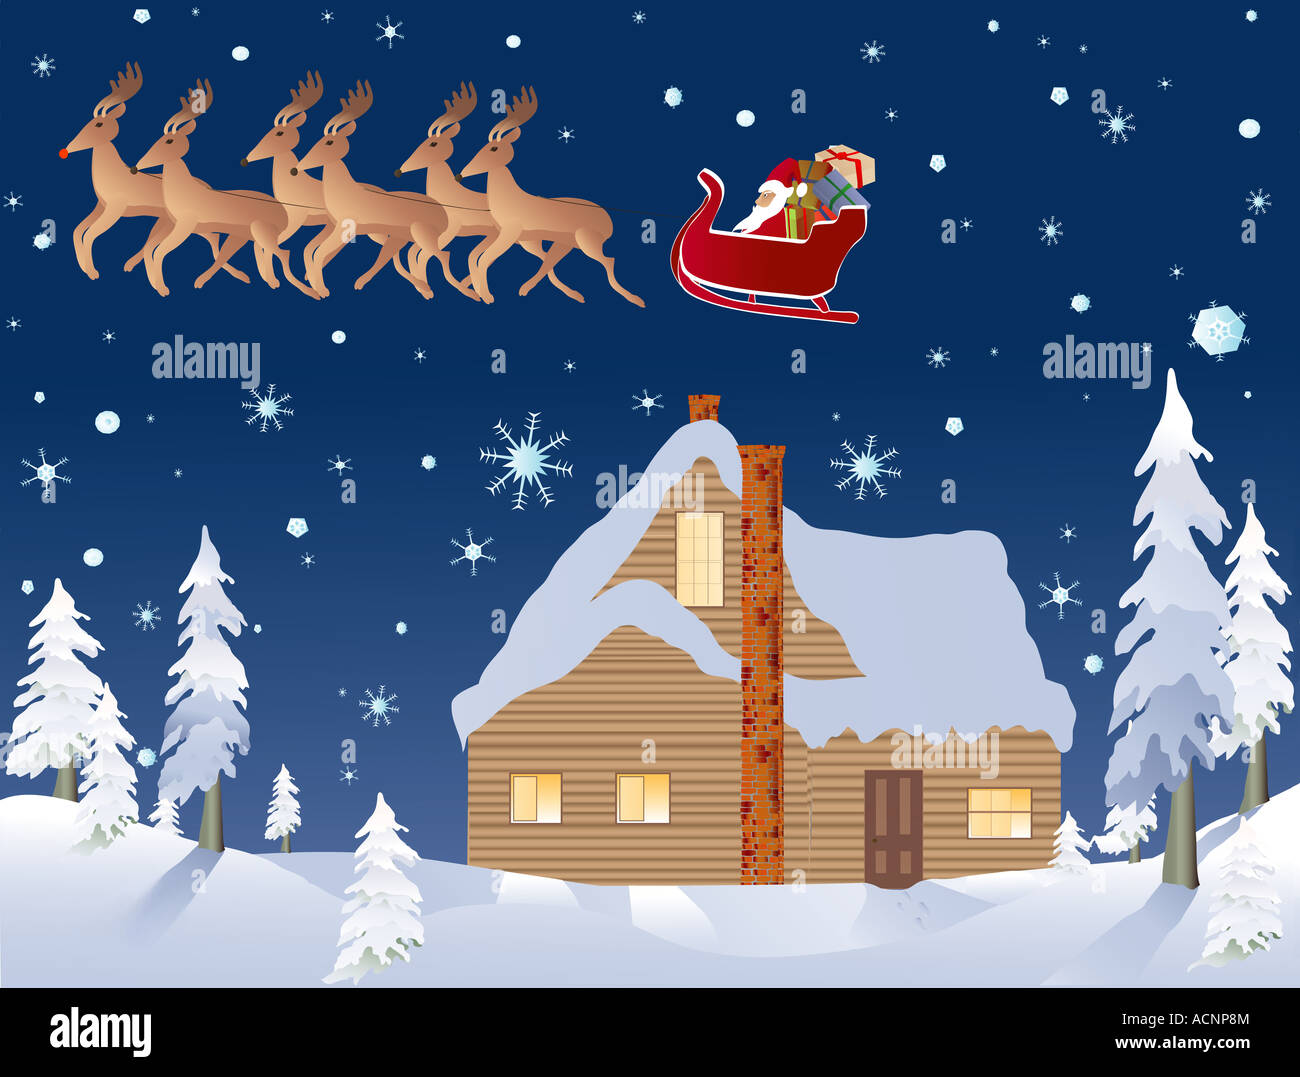 vector based illustration with cabin sleigh and reindeer as part of the background Stock Photo